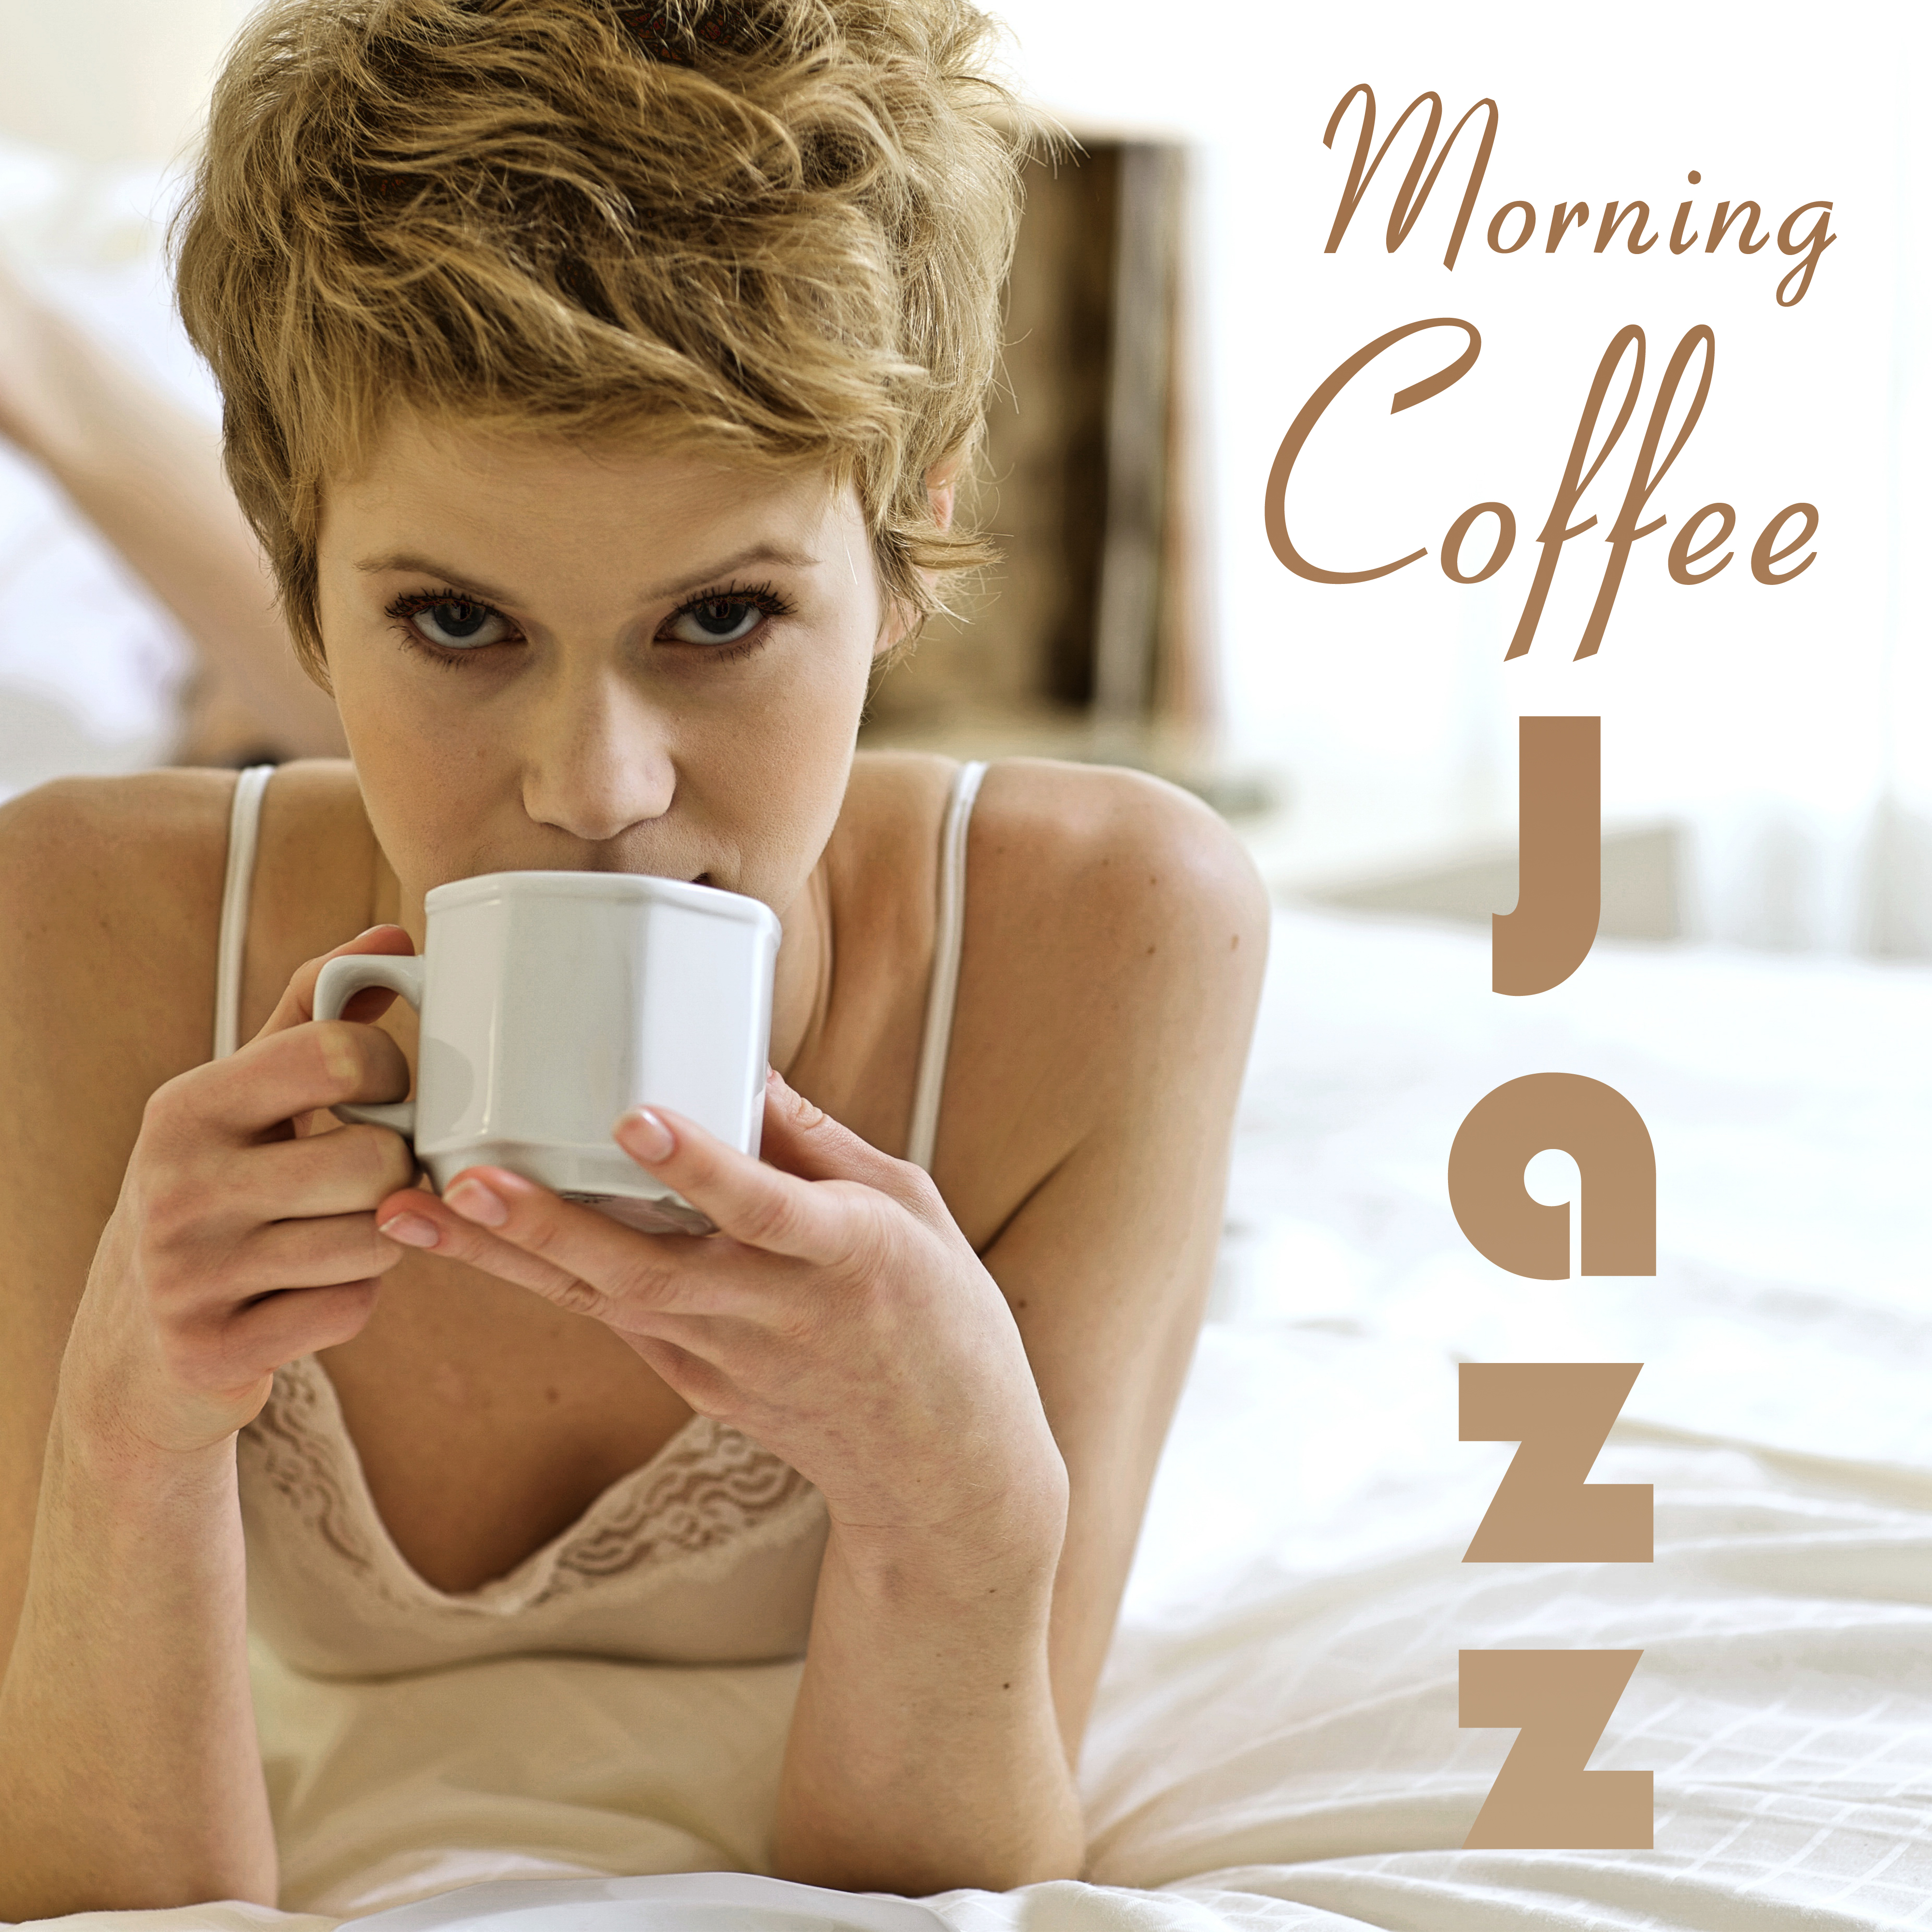 Morning Coffee Jazz: Day with Piano Music